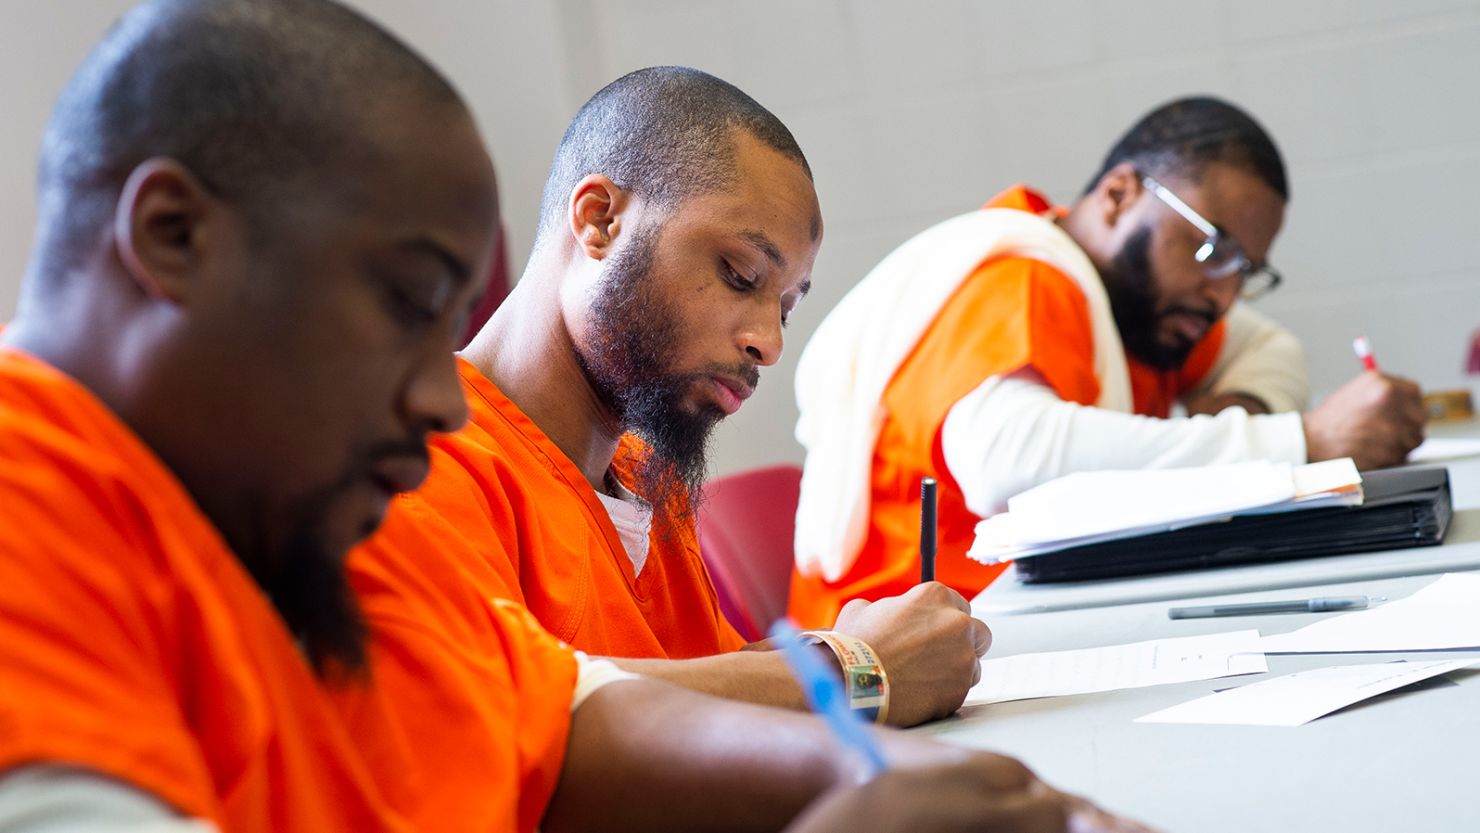 Inmates taking notes during a democracy class at the DC Jail in fall 2018.